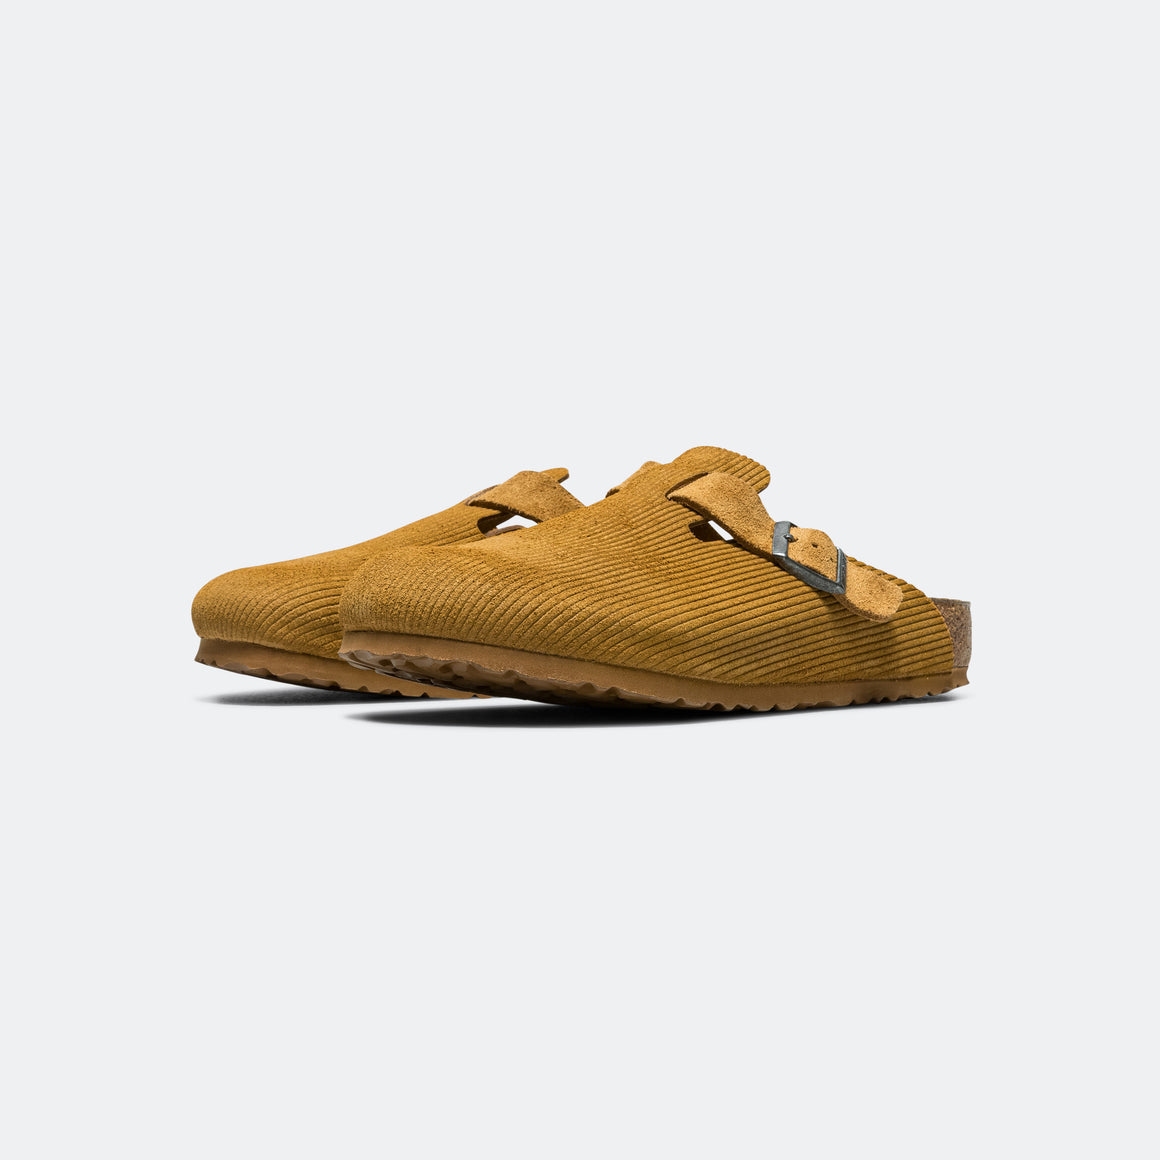 Birkenstock - Boston - Corduroy Cork Brown Embossed Suede Leather - UP THERE